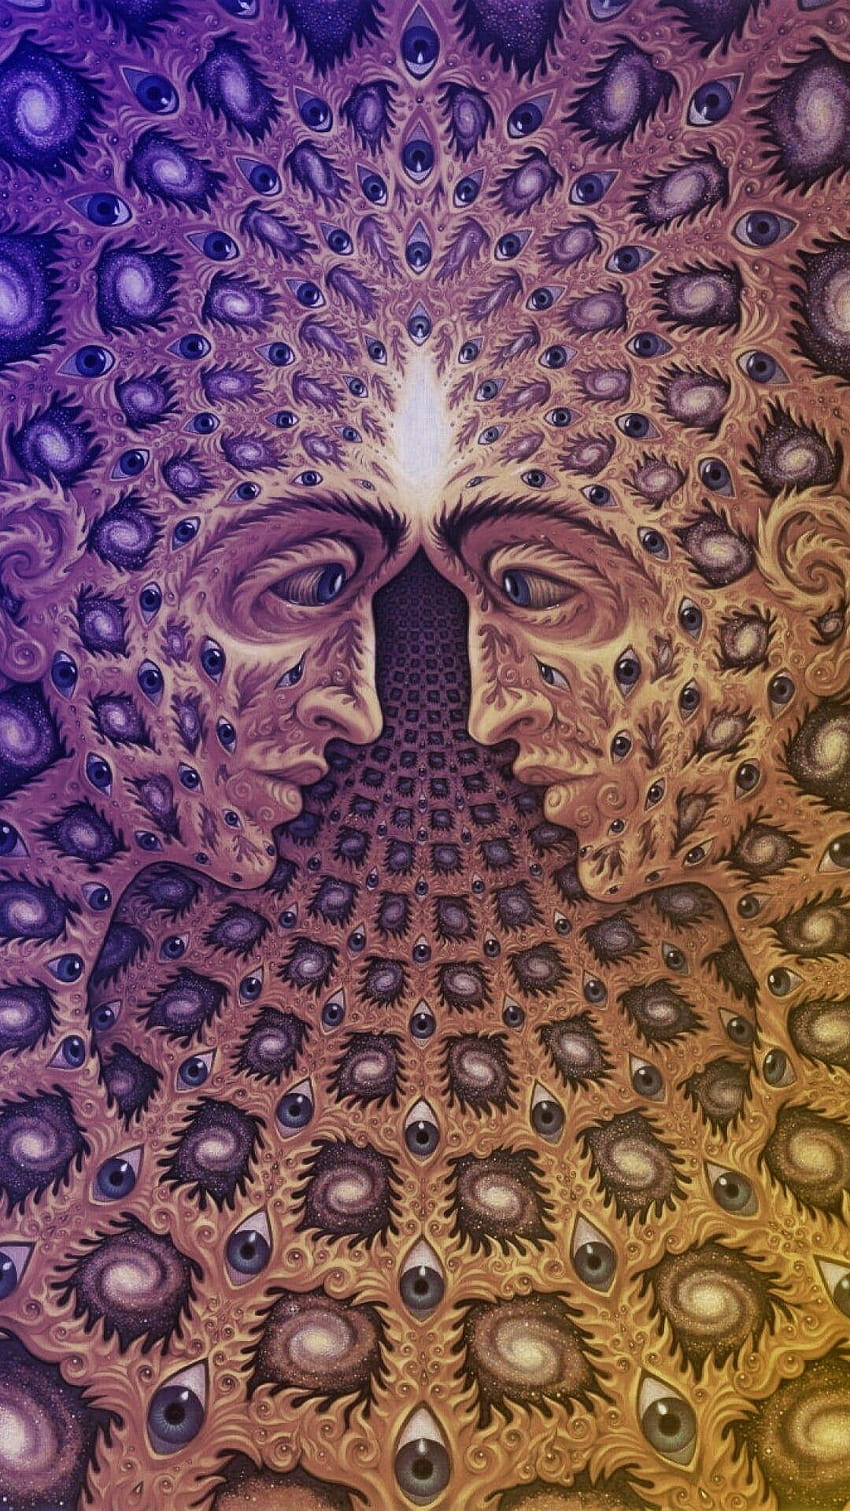 Alex Grey I edited for your phone or lock screen, alex grey backgrounds HD phone wallpaper